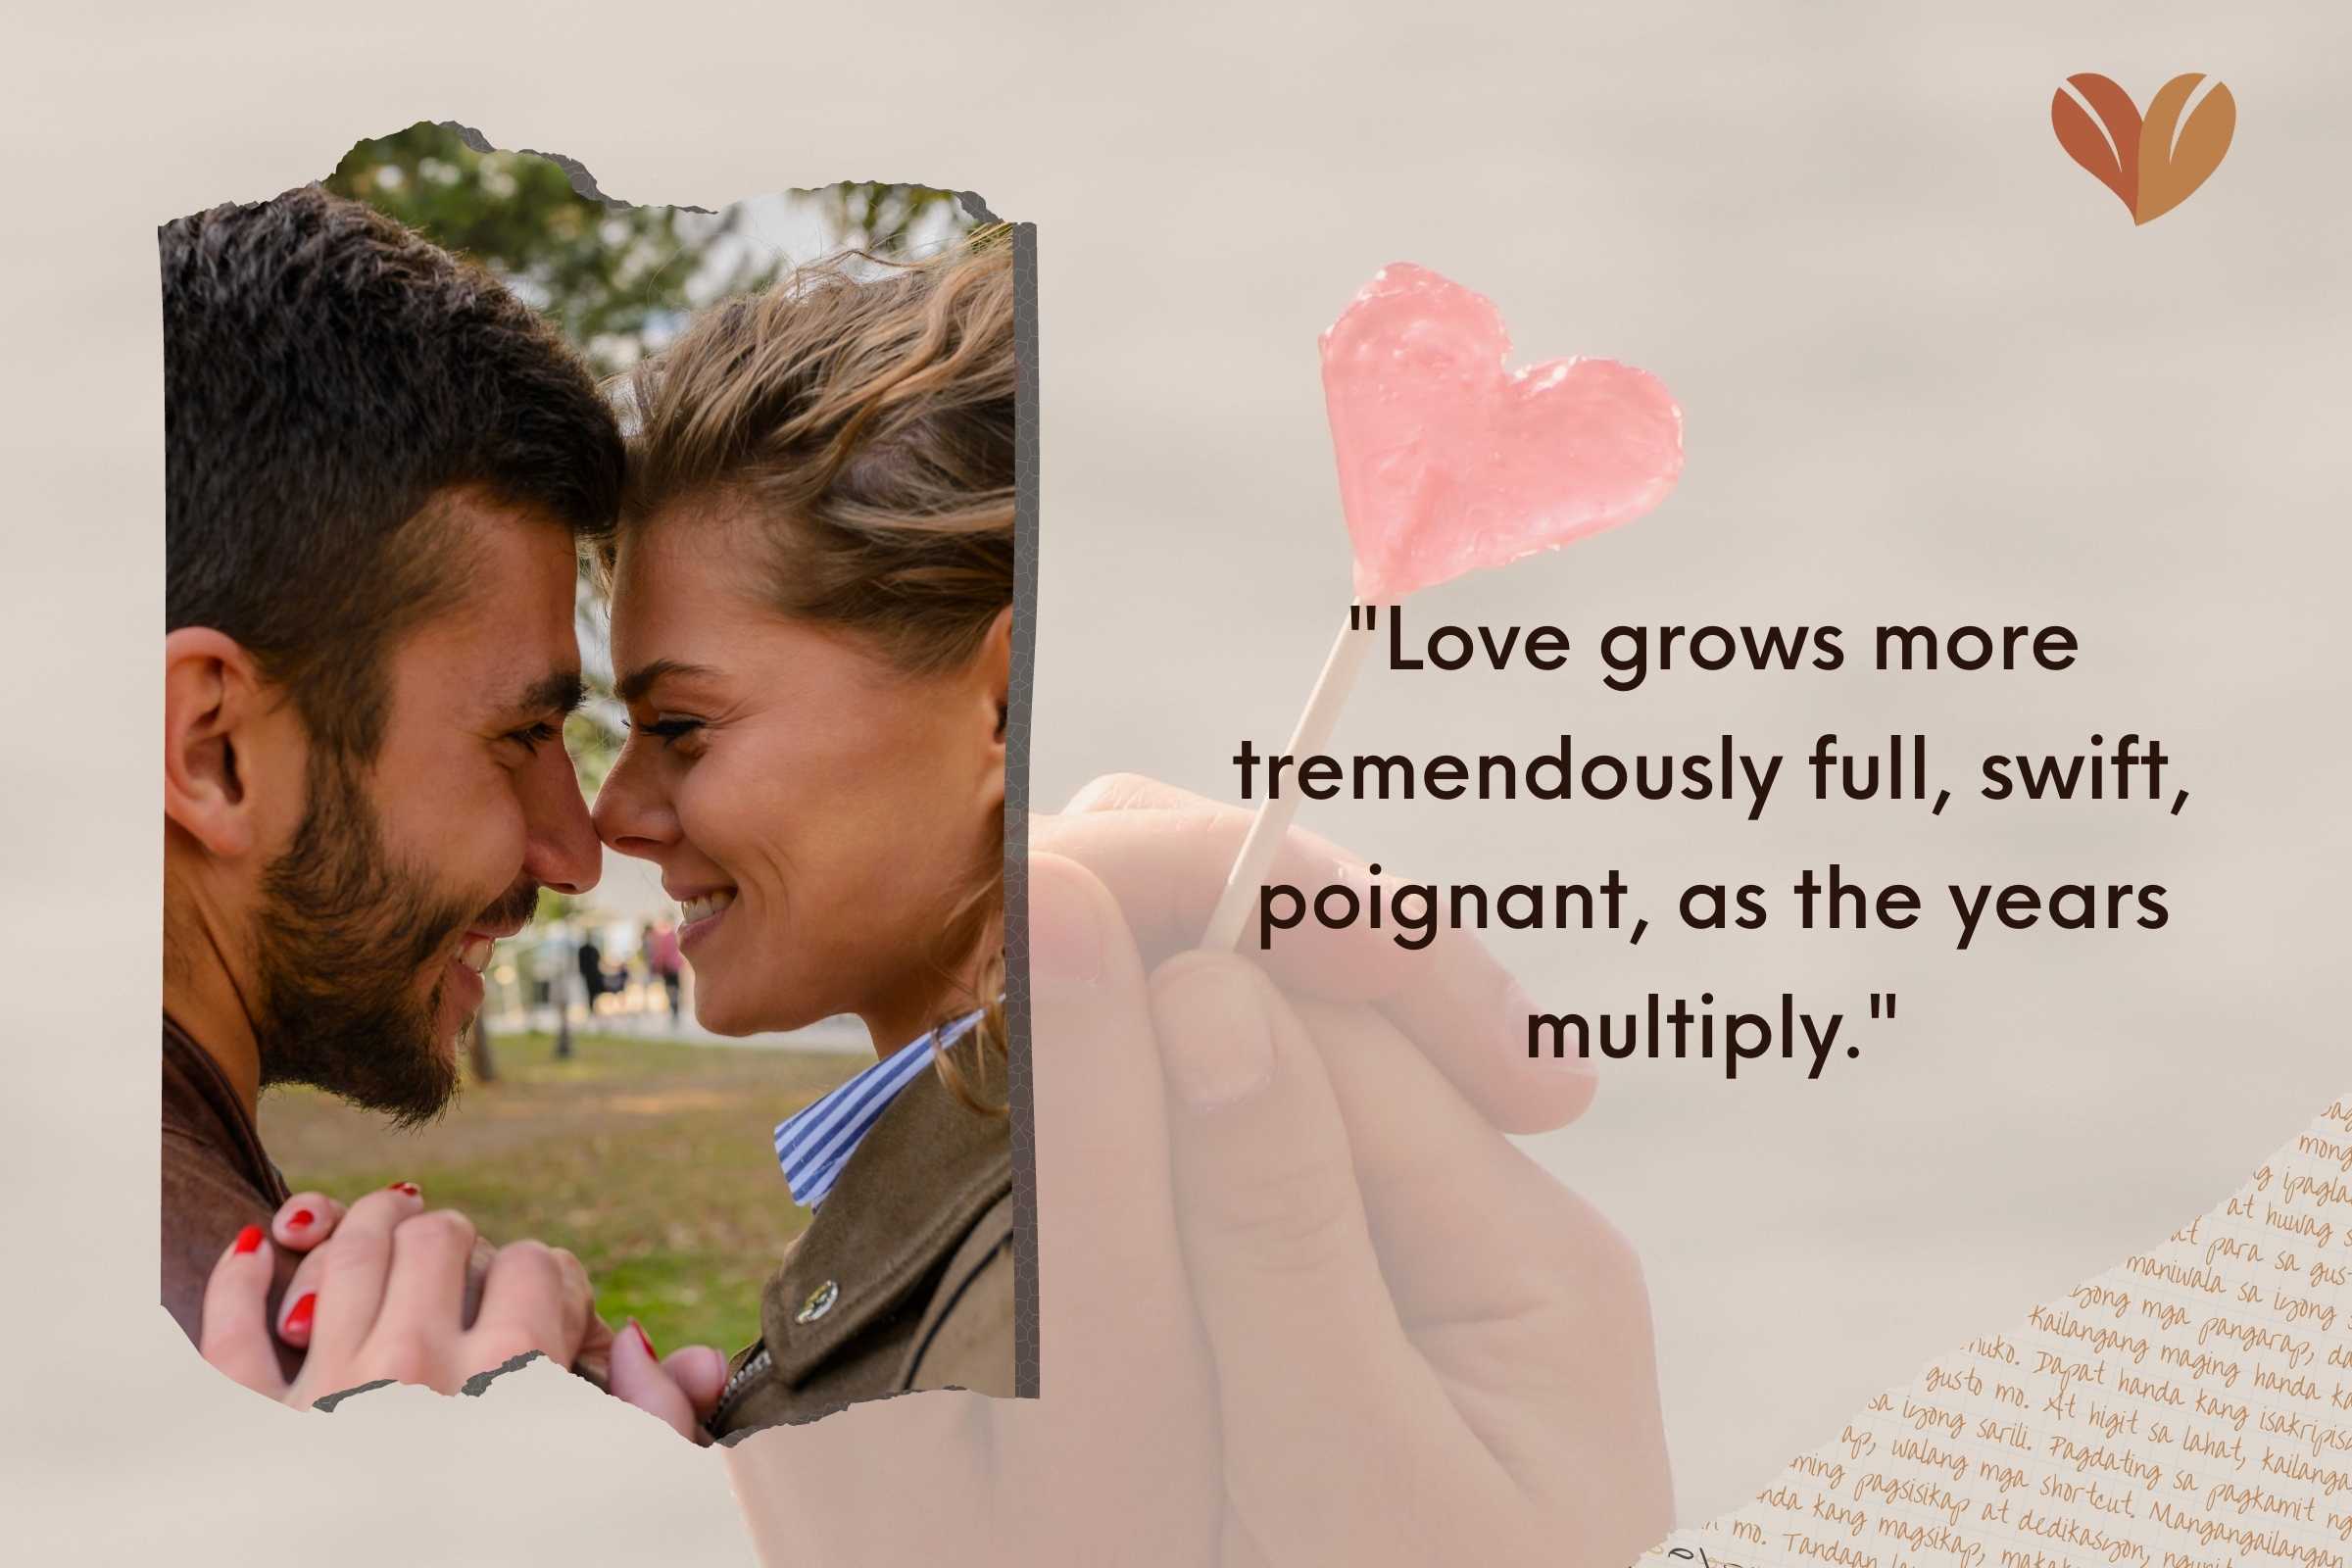 A collection of heartfelt anniversary saying quotes to express your love.